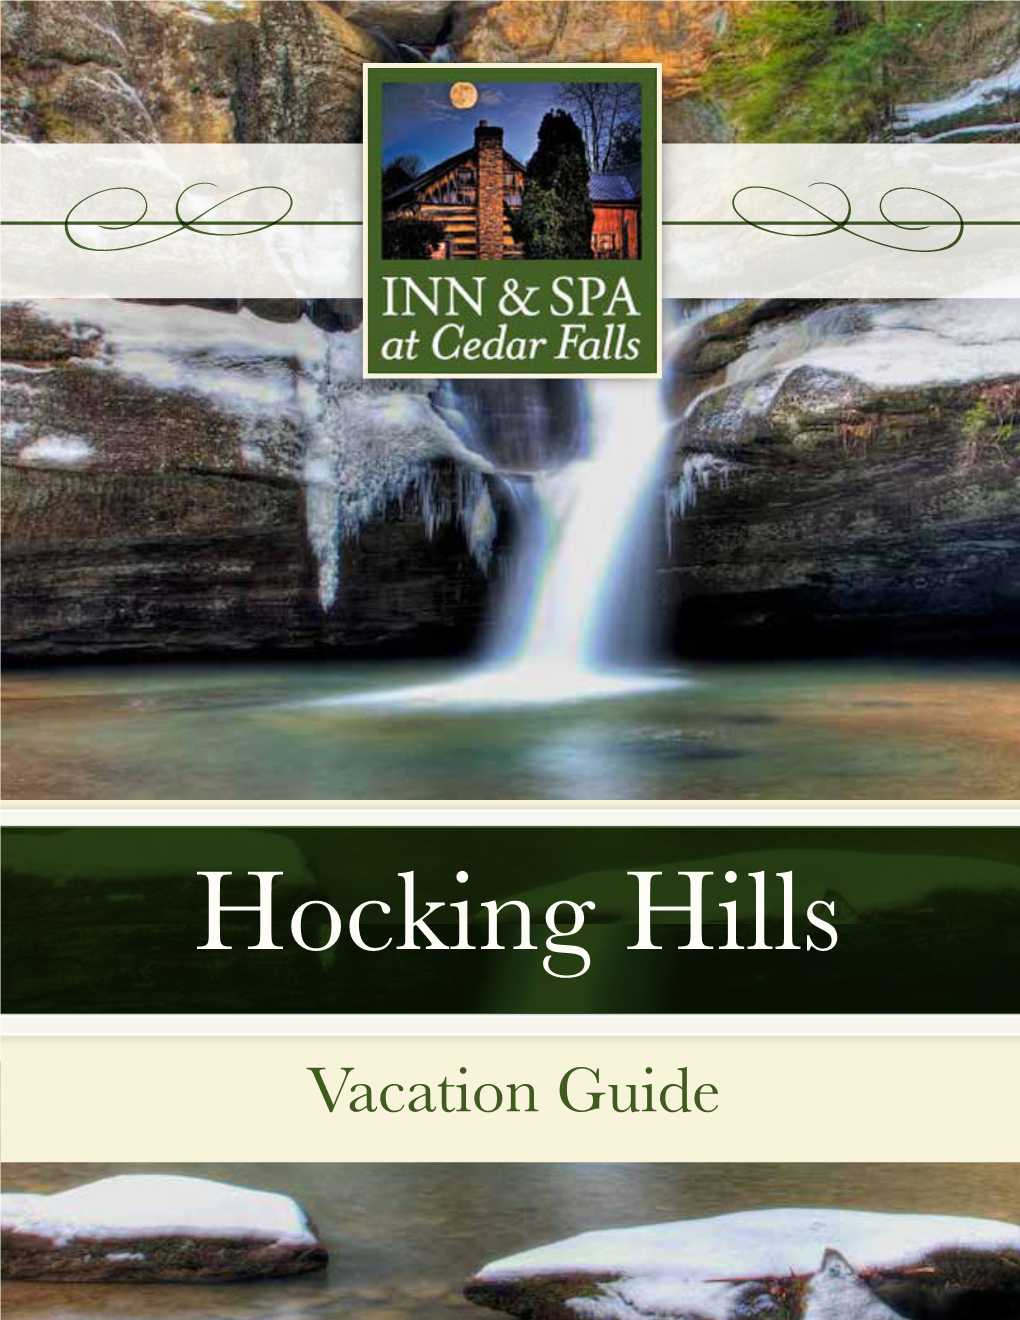 Zip Lining 10 Shopping 11 Restaurants 13 Annual Festivals and Events 14 Cottages 17 Cabin Rental 18 Amenities 19